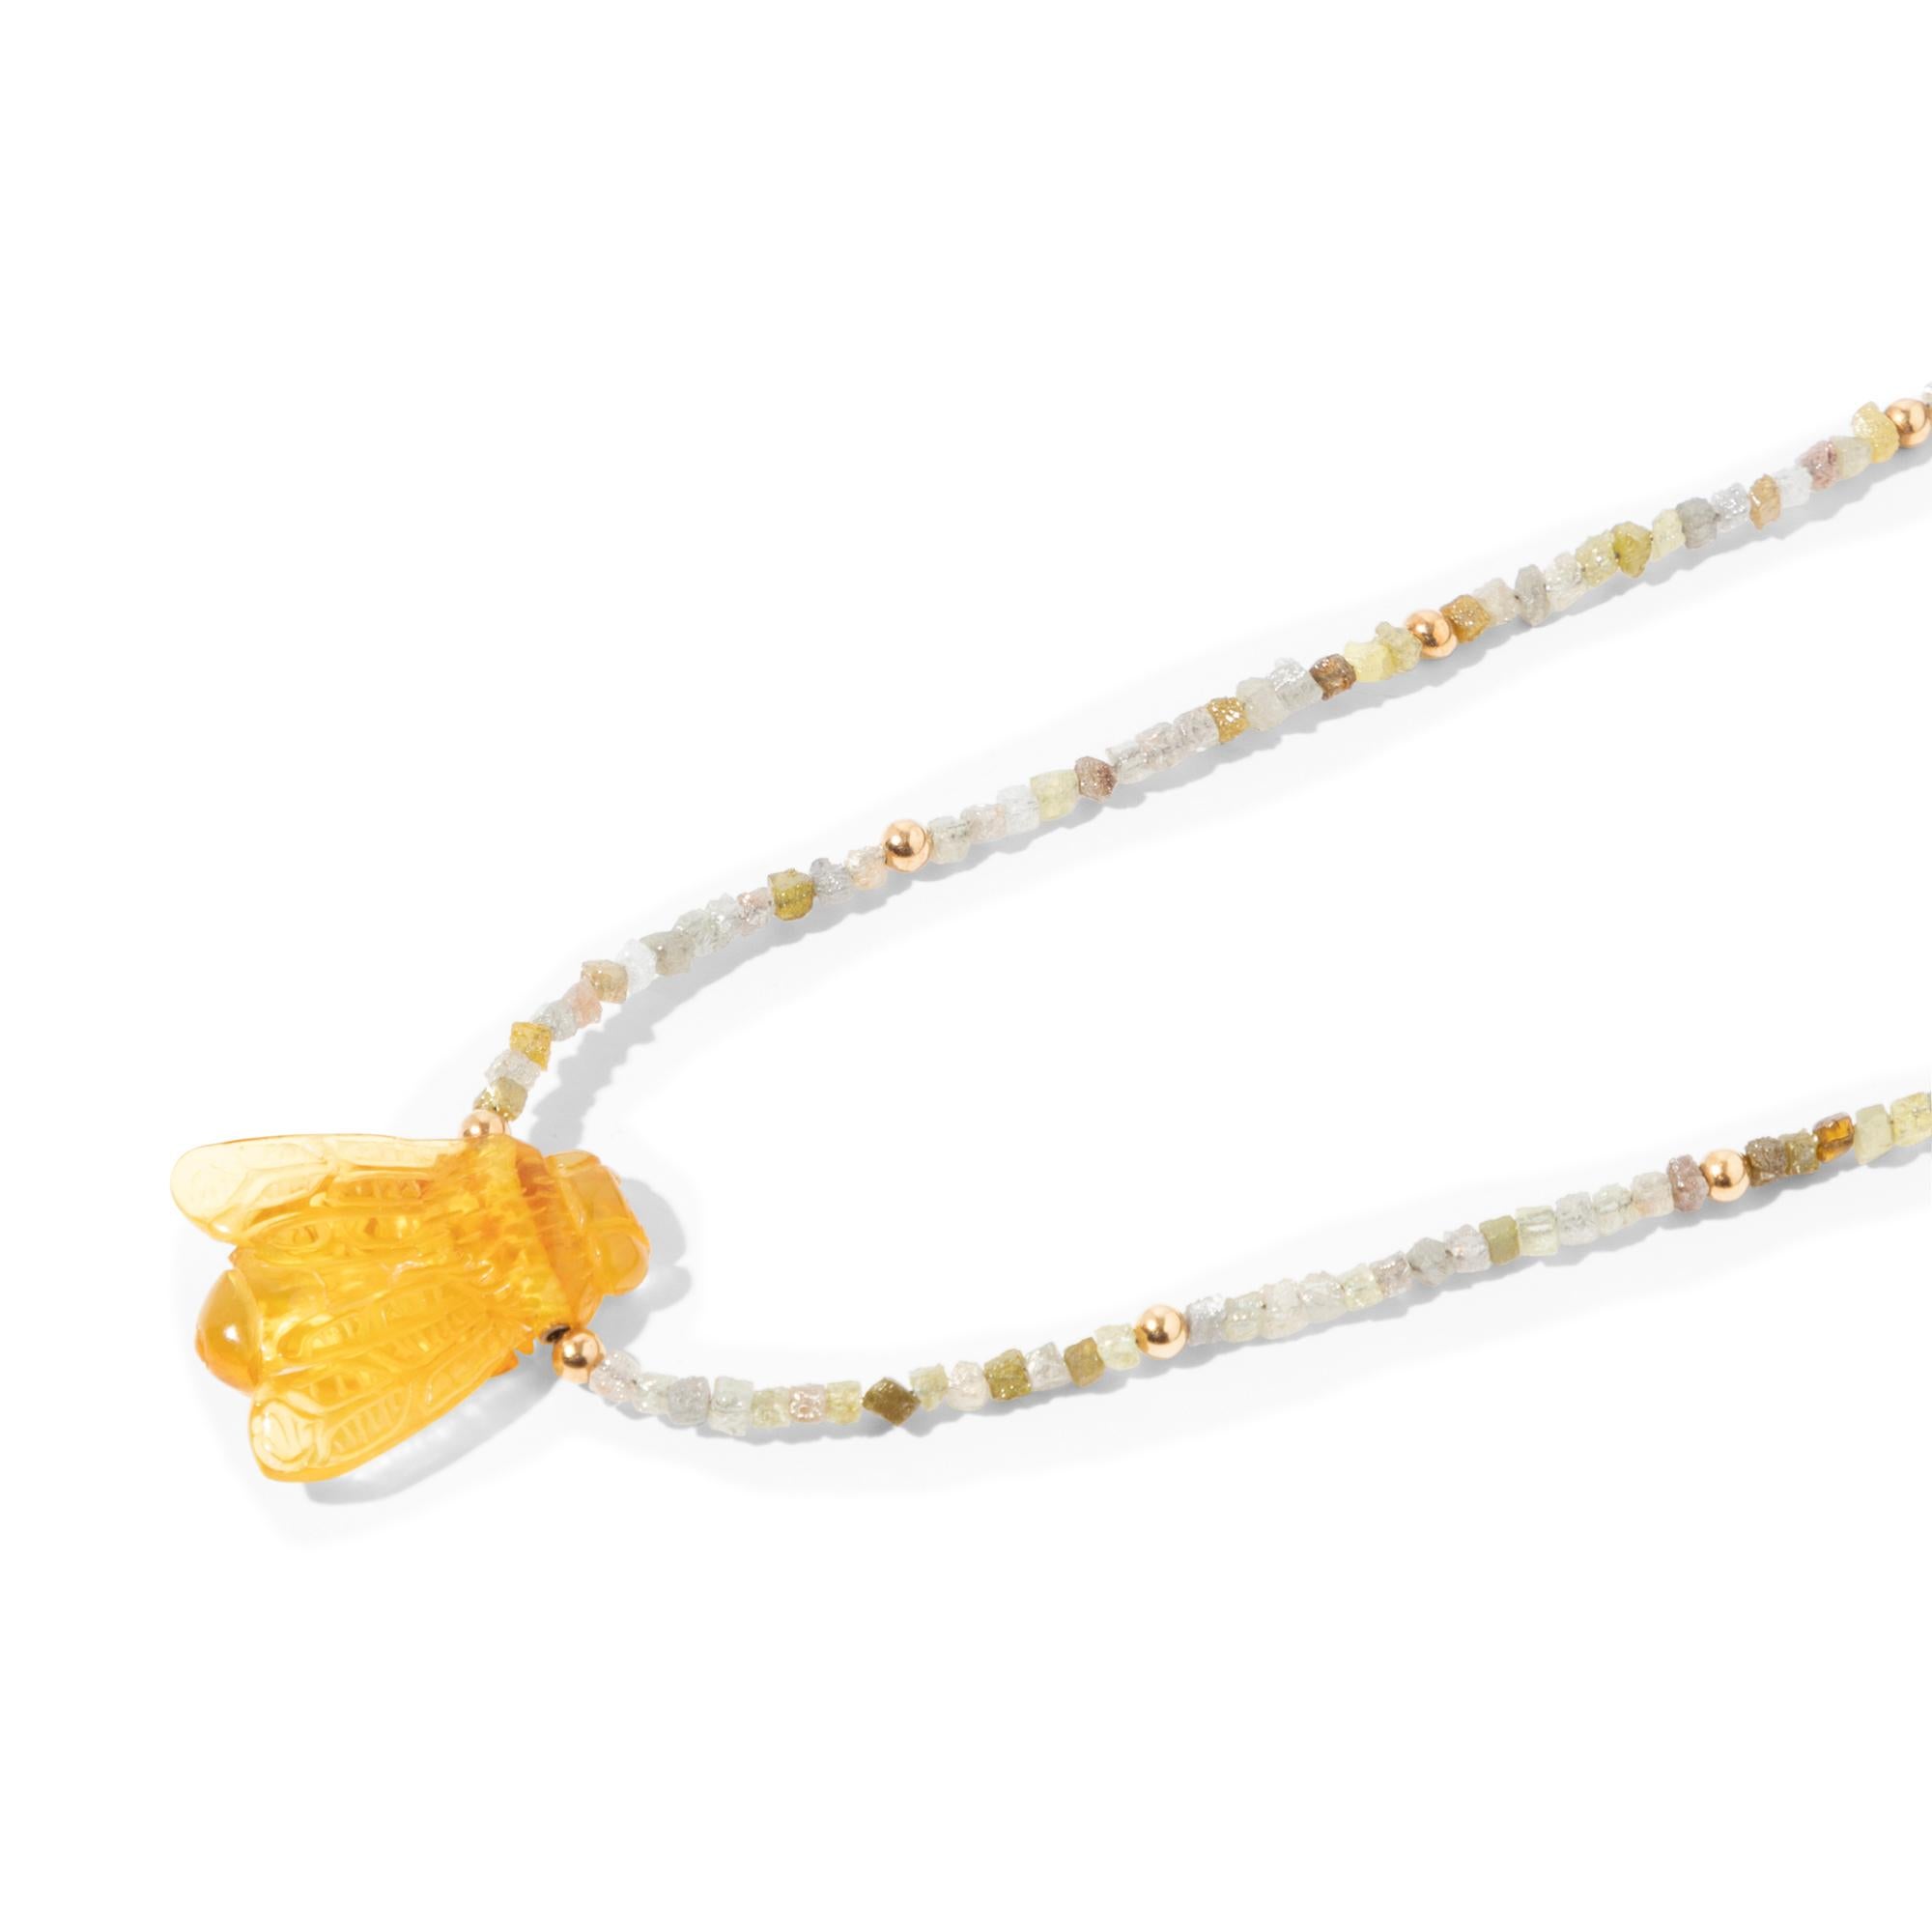 Uncut 18k Yellow Gold Rough Diamond Beaded Necklace With Hand-carved Amber Bee For Sale